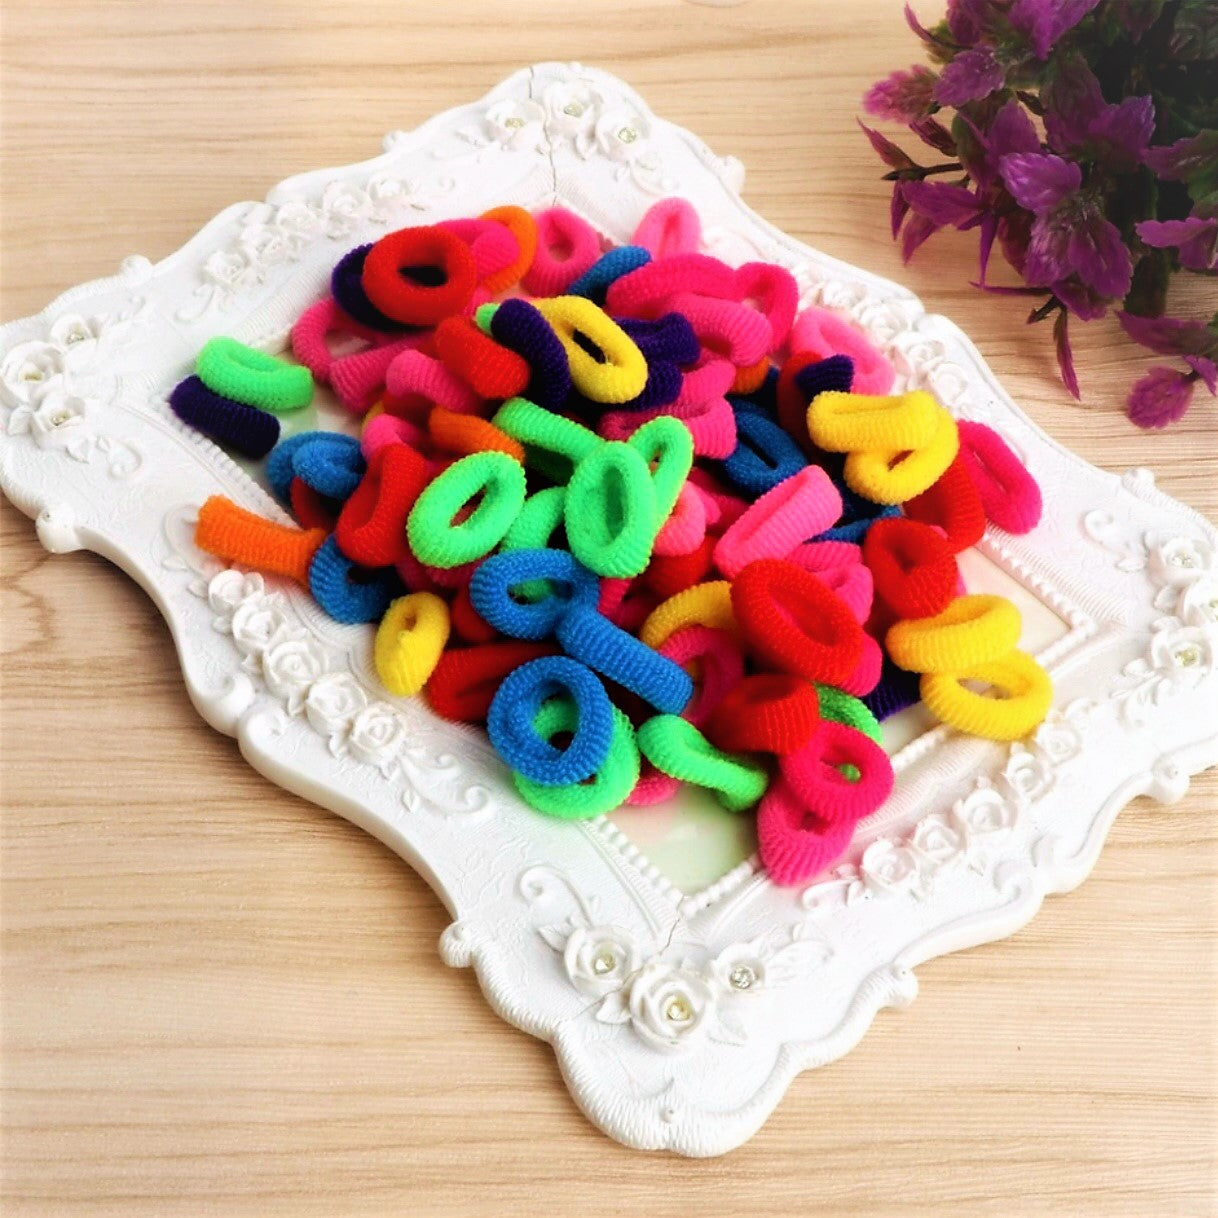 Hair Bands Elastics Ties for Baby Girls Colorful Set Tiny Soft Rubber Bands for Kids Women, Durable Hair accessories